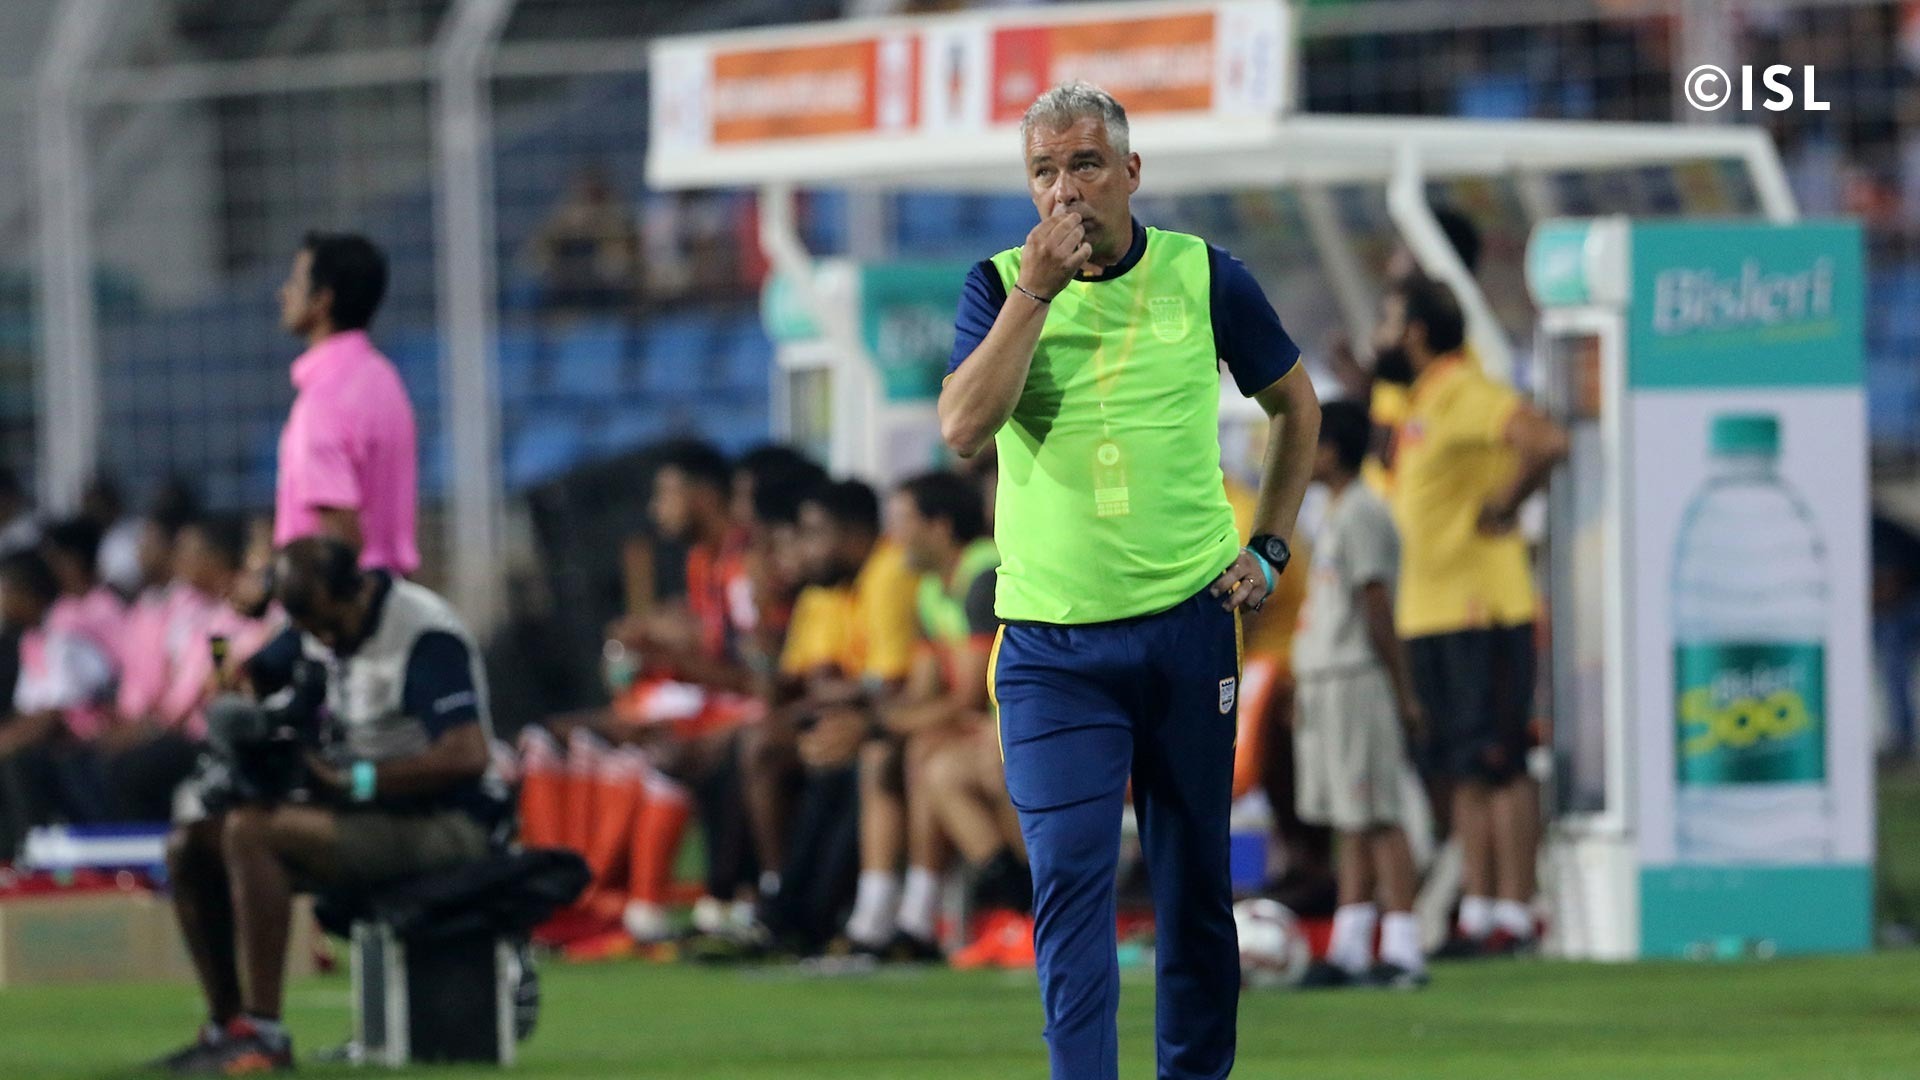 ISL | Now it is time to take rest and come back stronger, says Jorge Costa